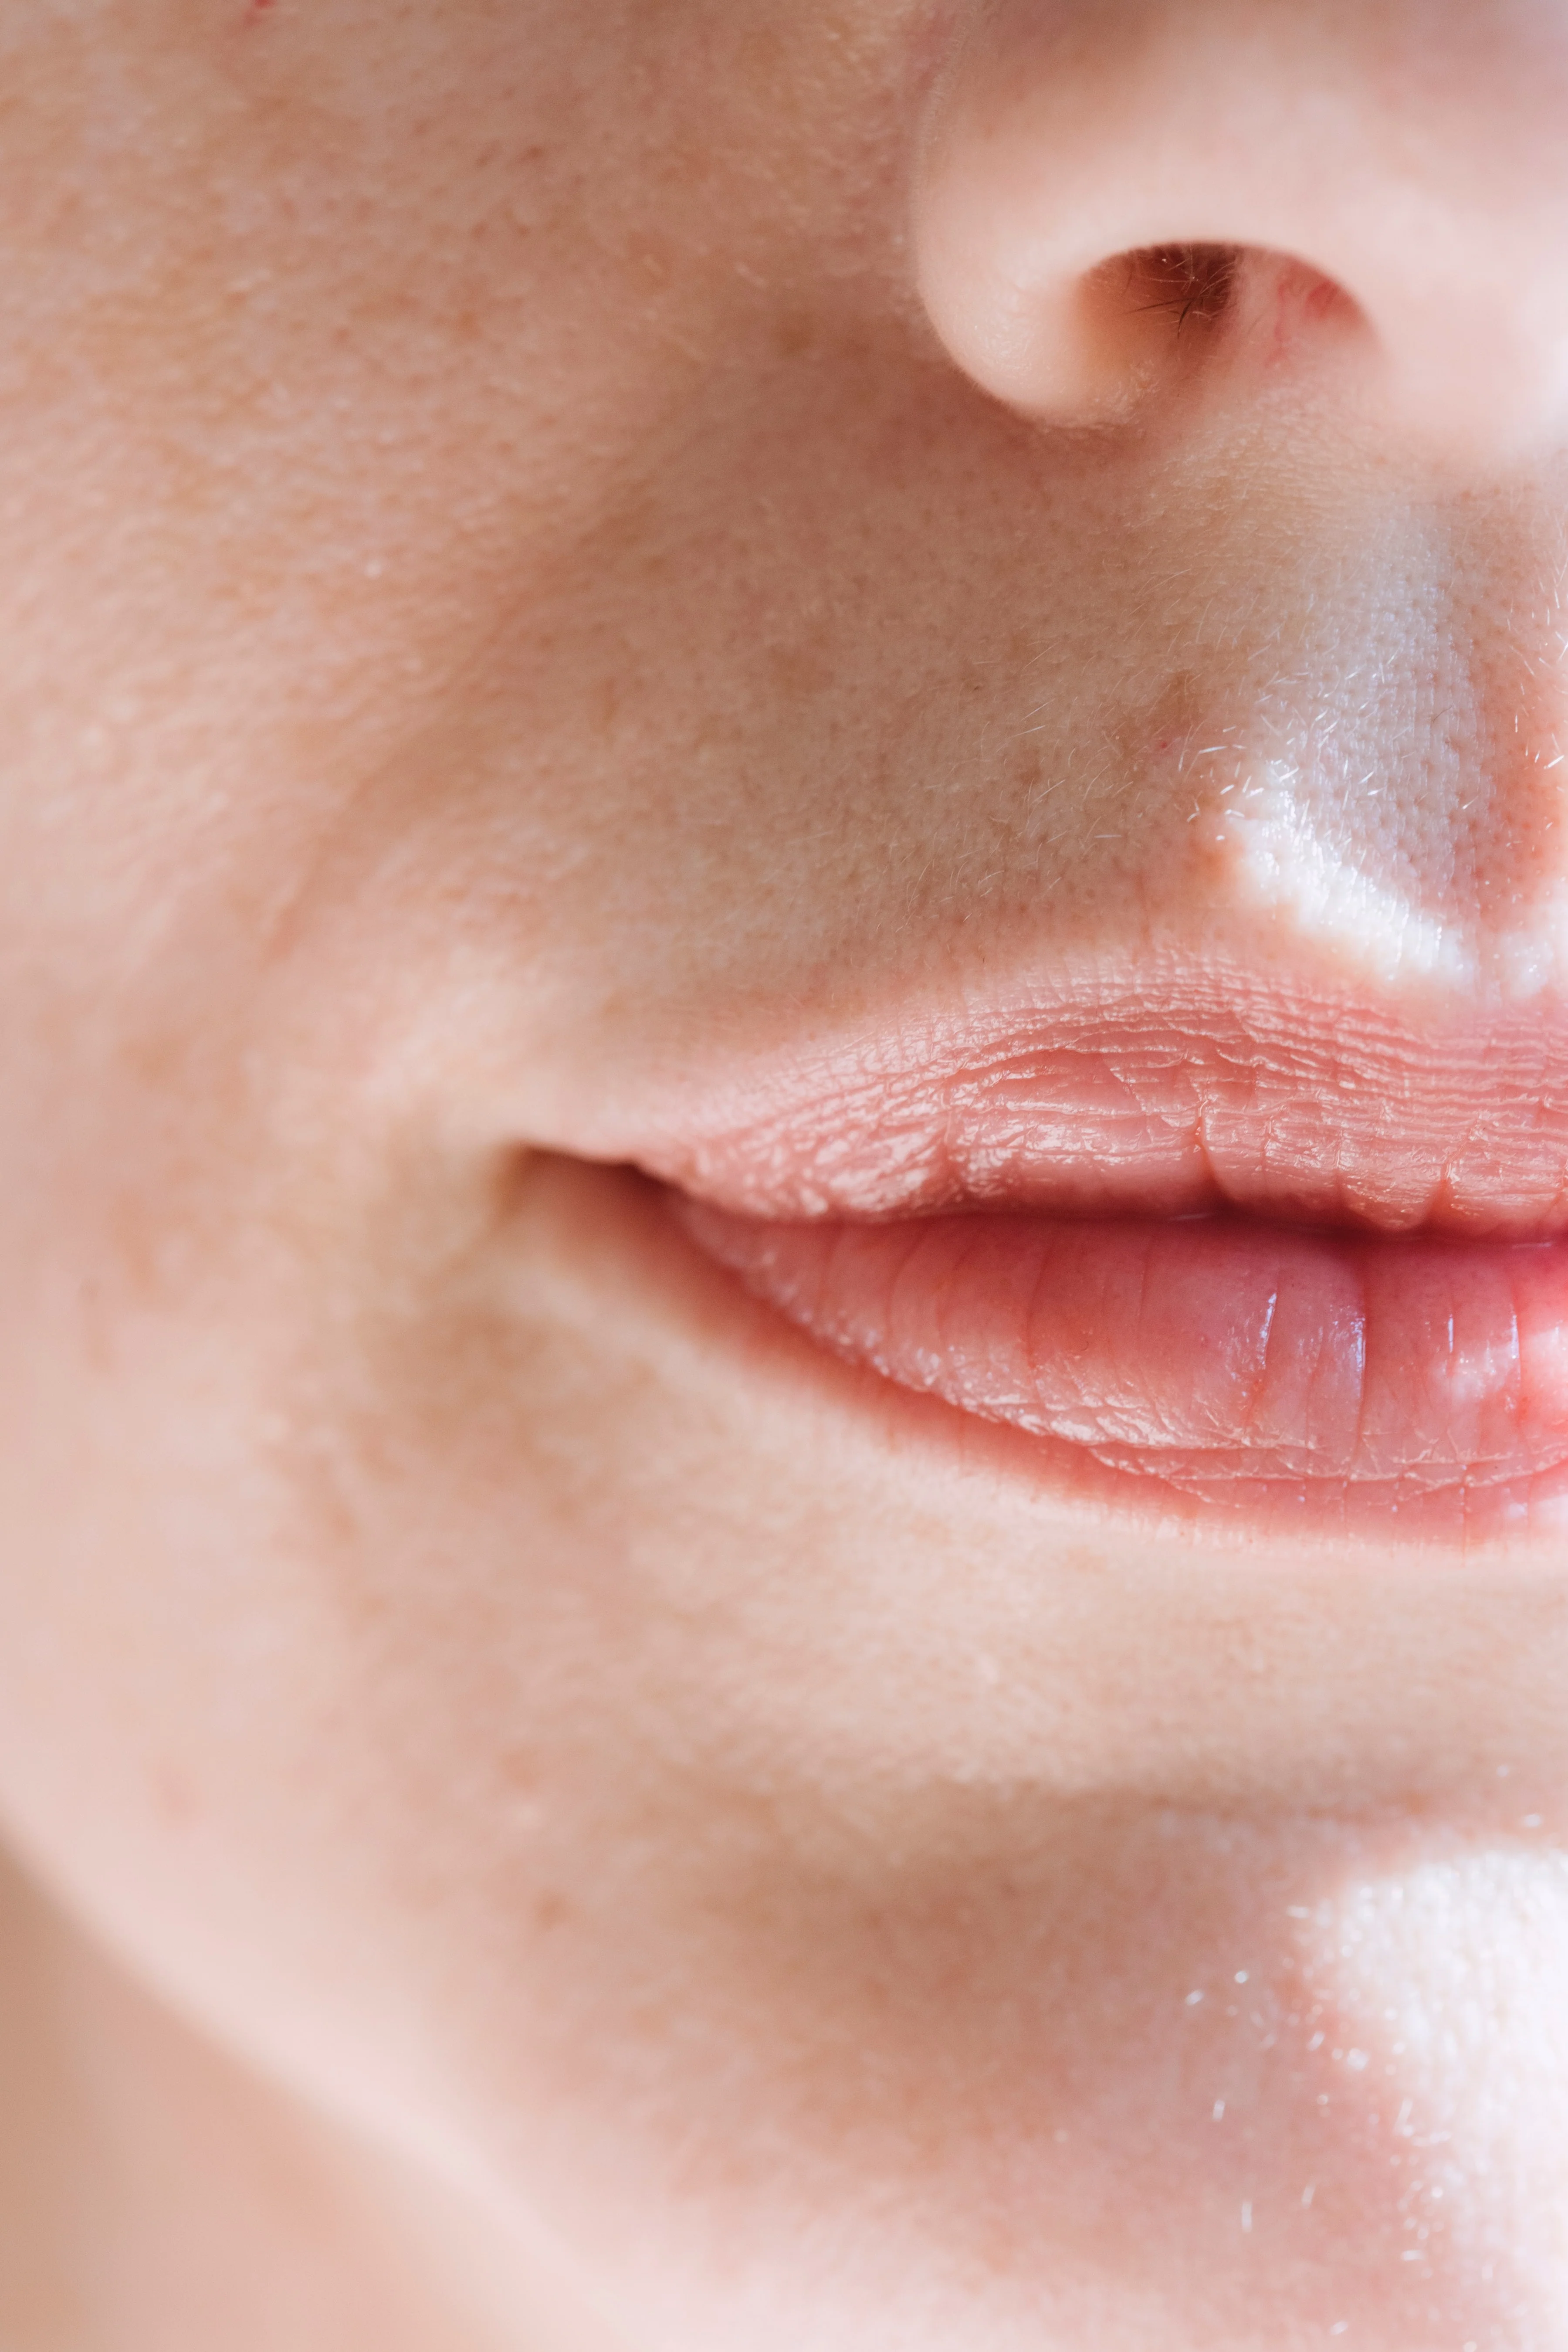 GO! Tattoo Removal — The inner lower lip tattoo typically doesn't stay...